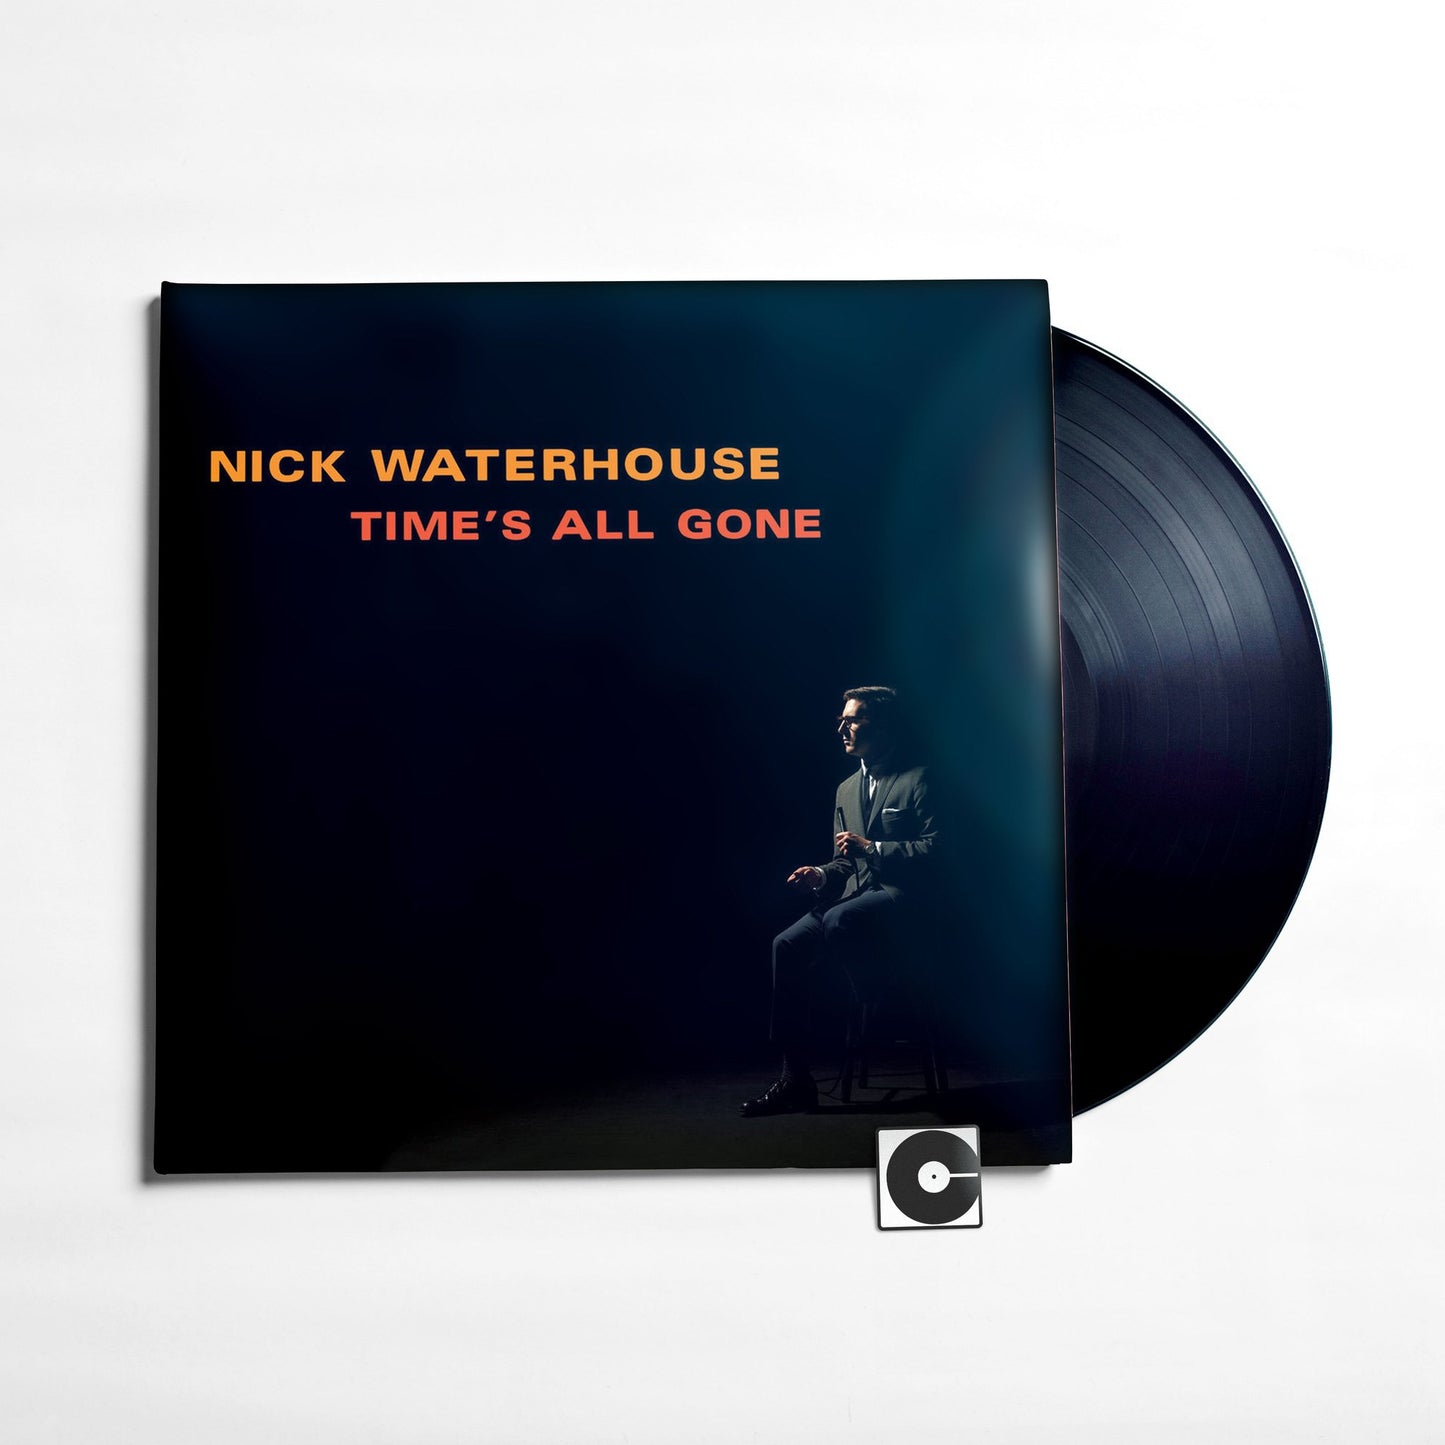 Nick Waterhouse - "Time's All Gone"